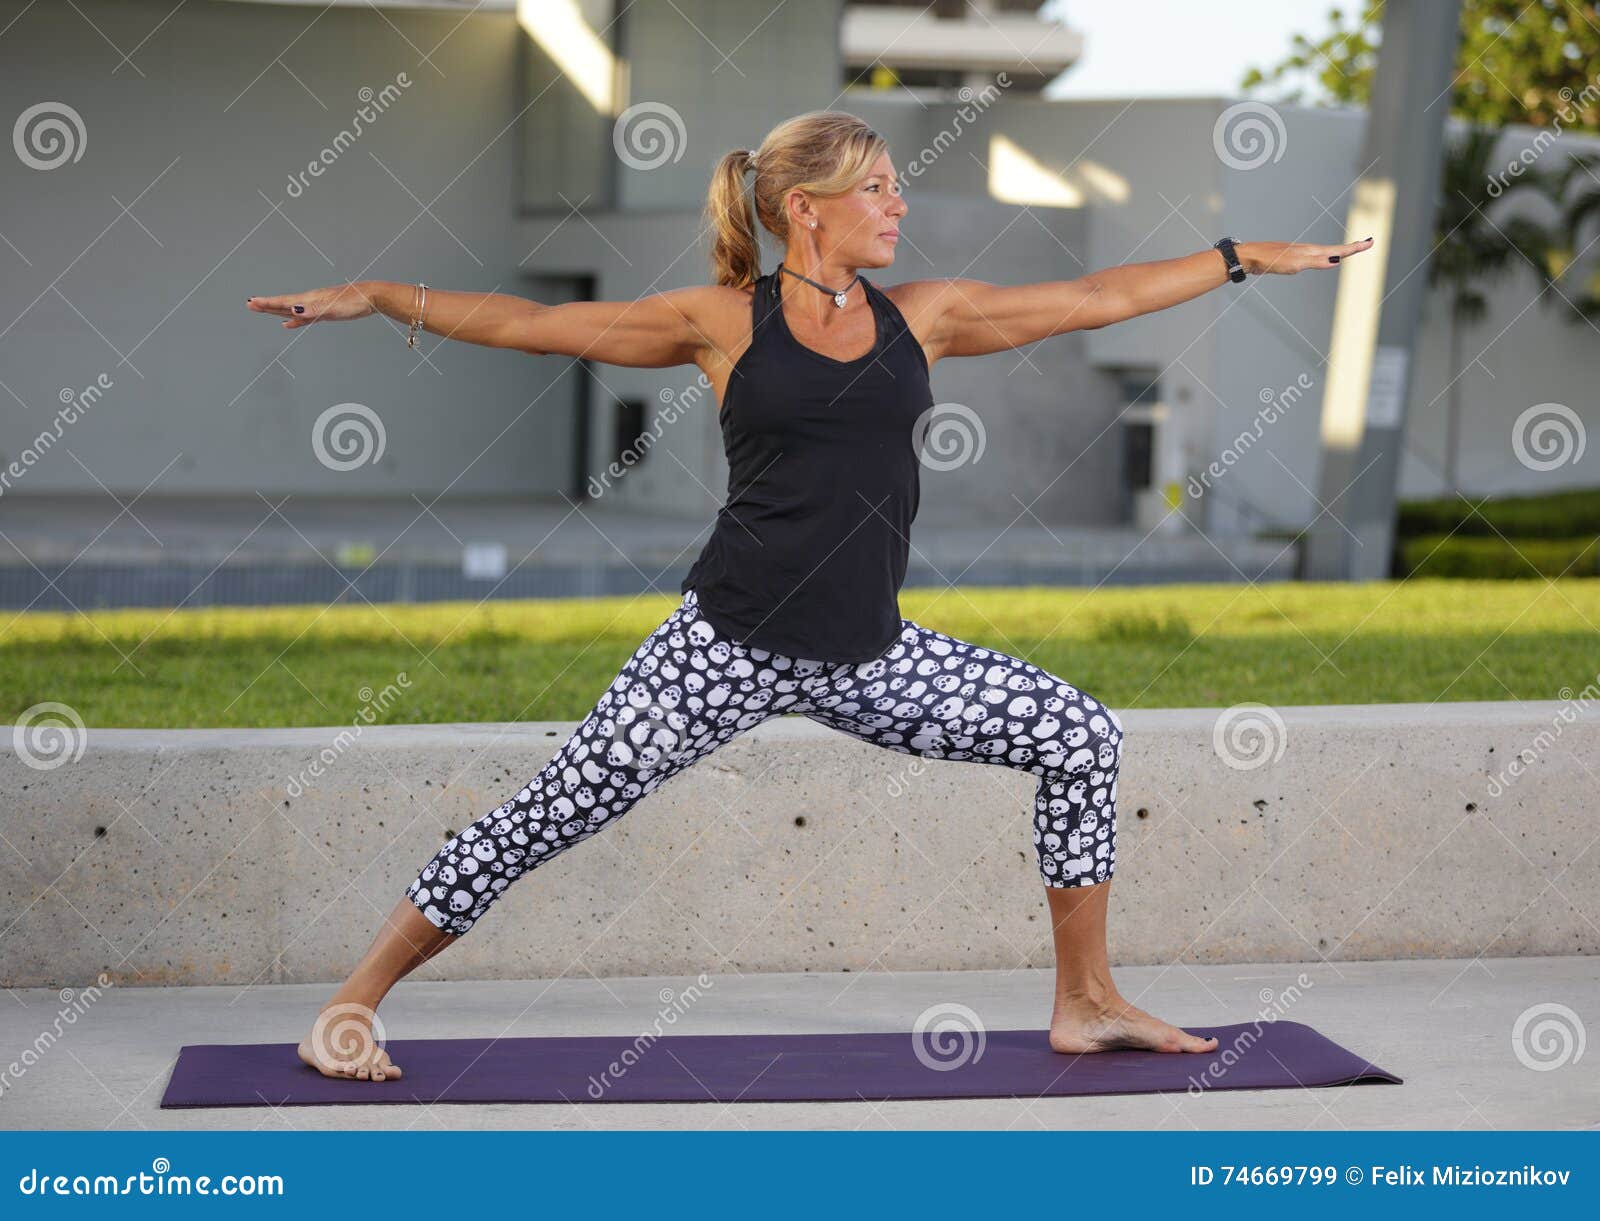 Mature Woman in a Warrior Pose Stock Image - Image of clothing, model